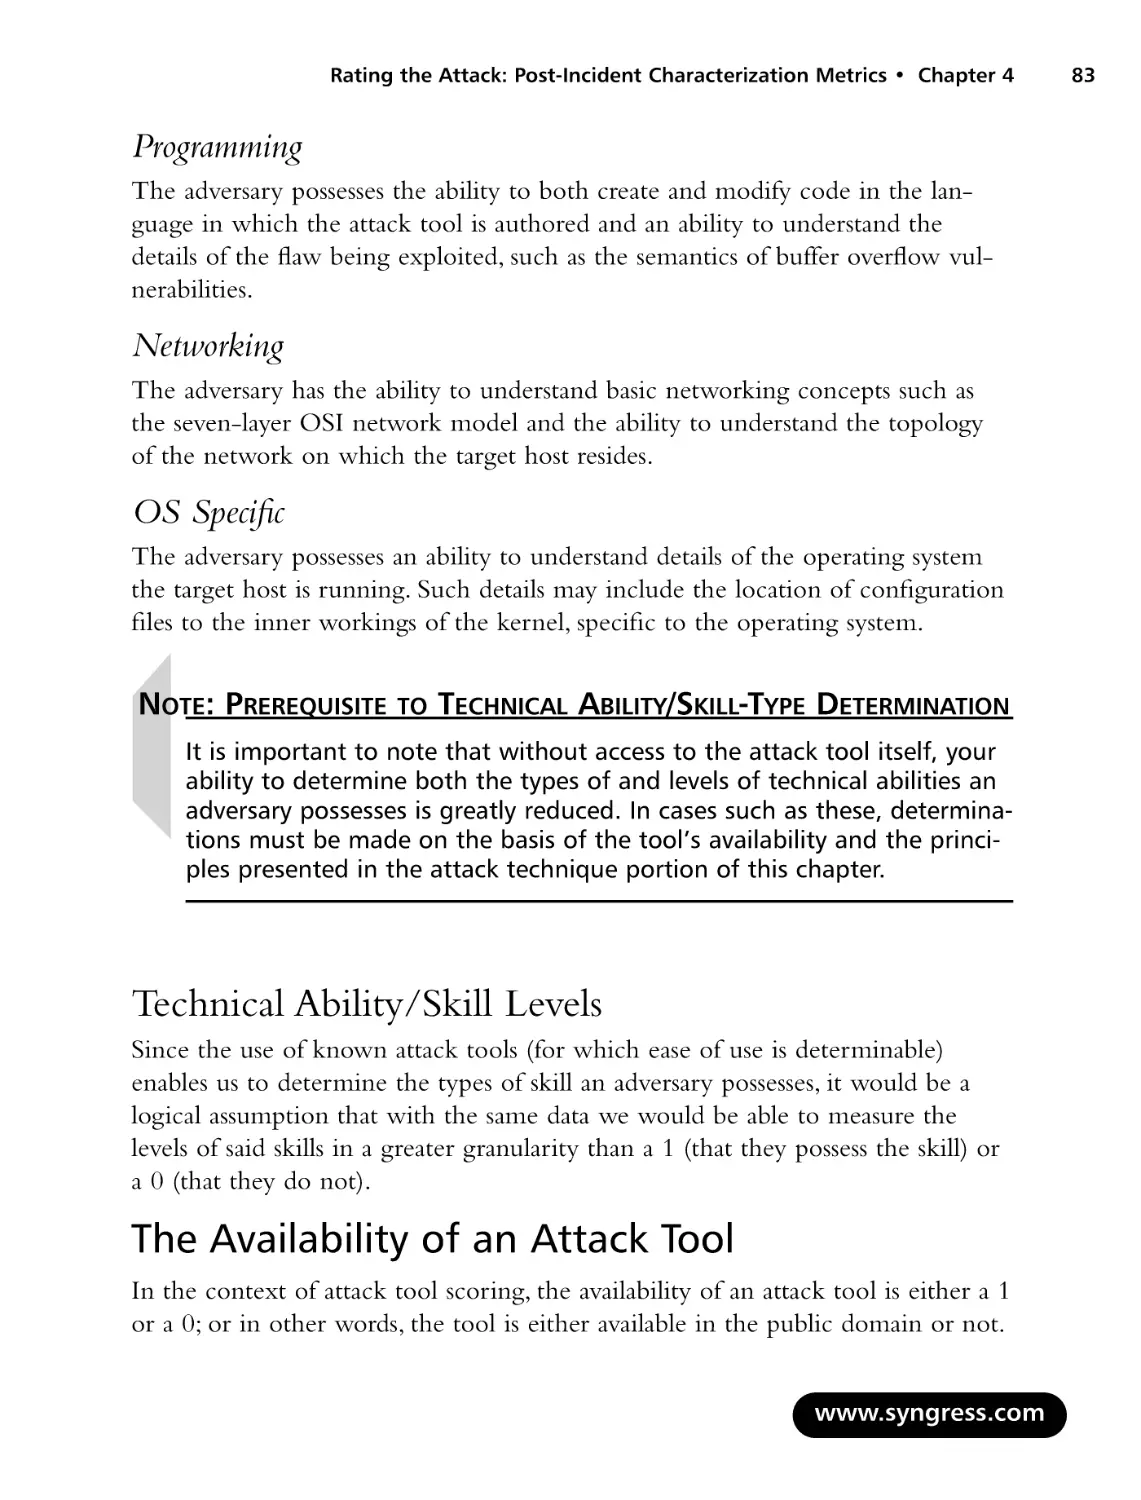 Technical Ability/Skill Levels
The Availability of an Attack Tool